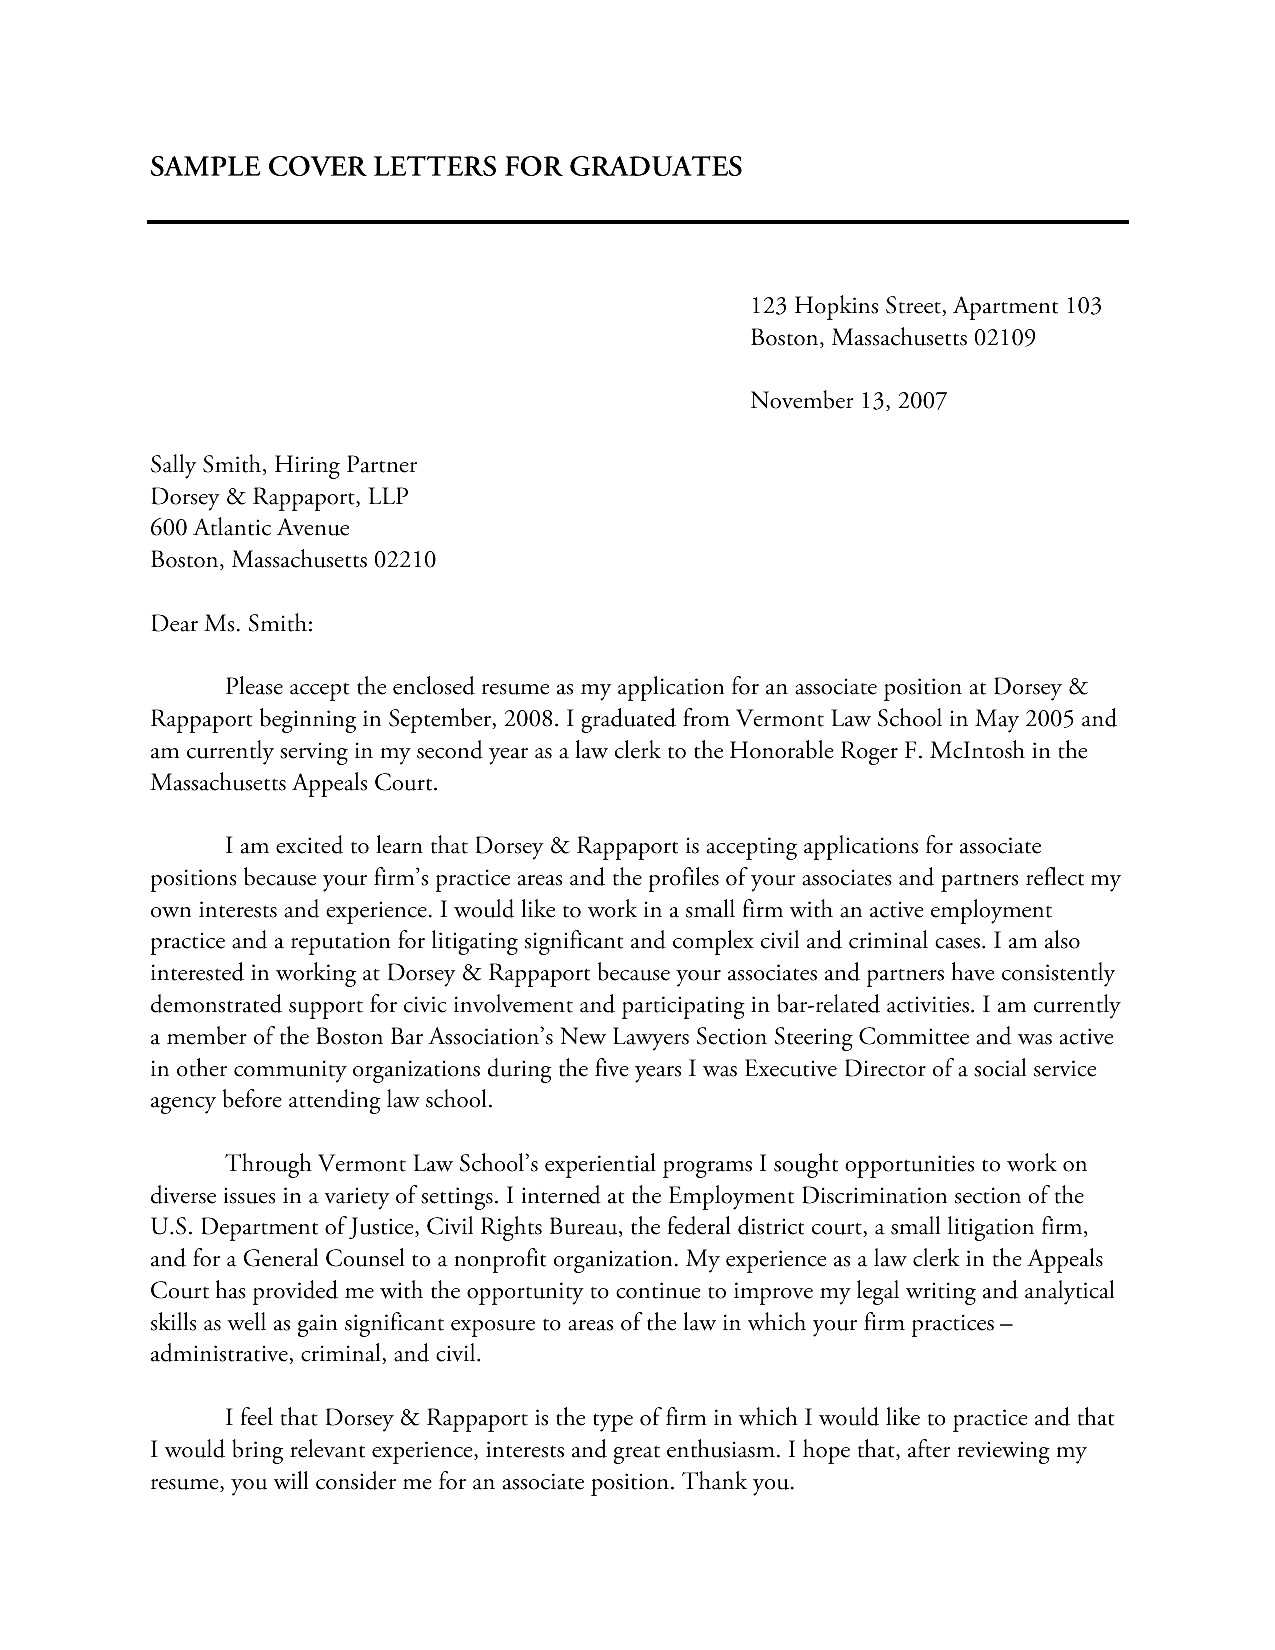 example of application letter for lawyer